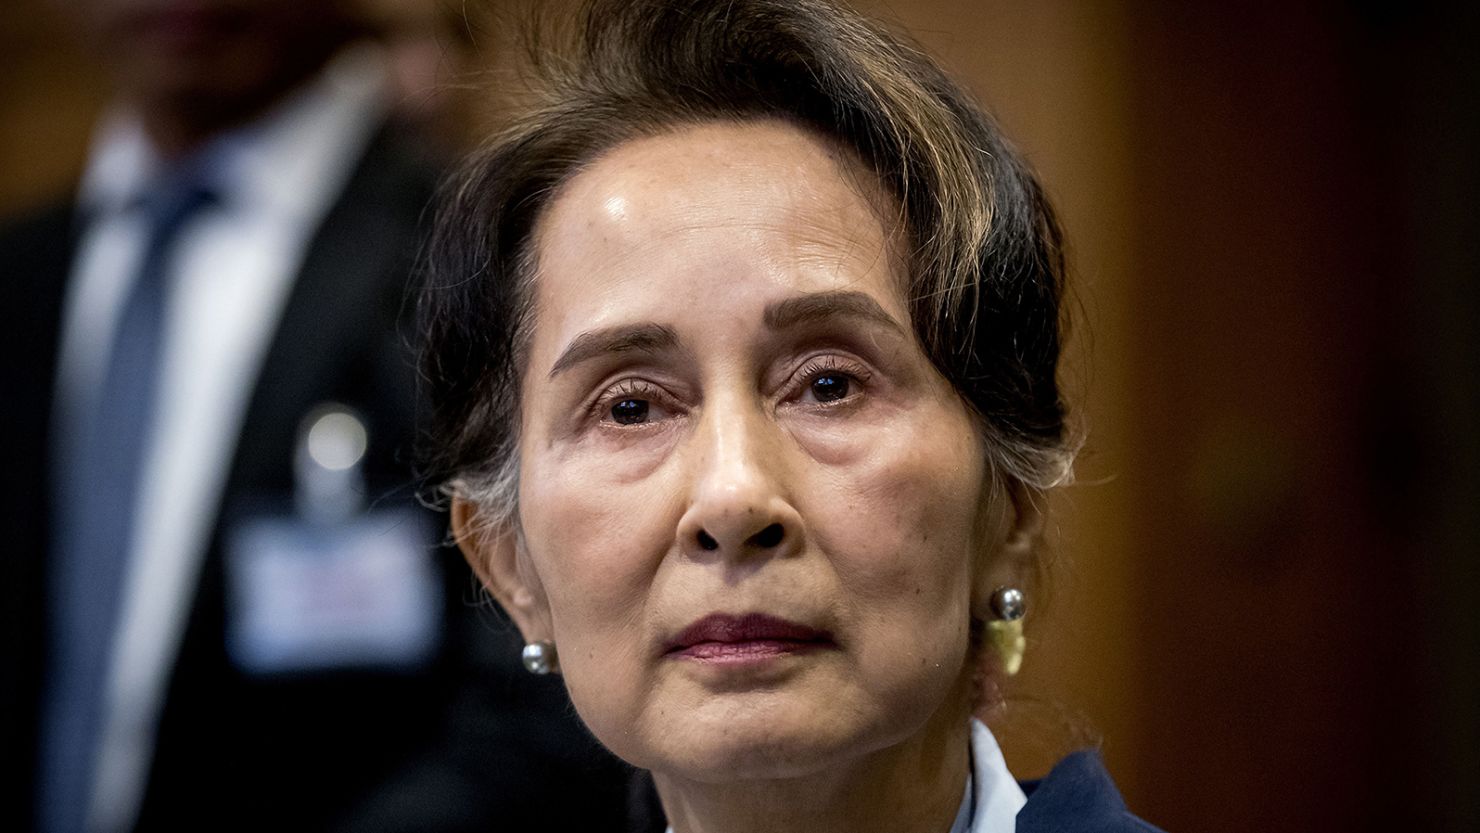 Myanmar's ousted State Counsellor Aung San Suu Kyi on December 11, 2019 in the Peace Palace of The Hague.